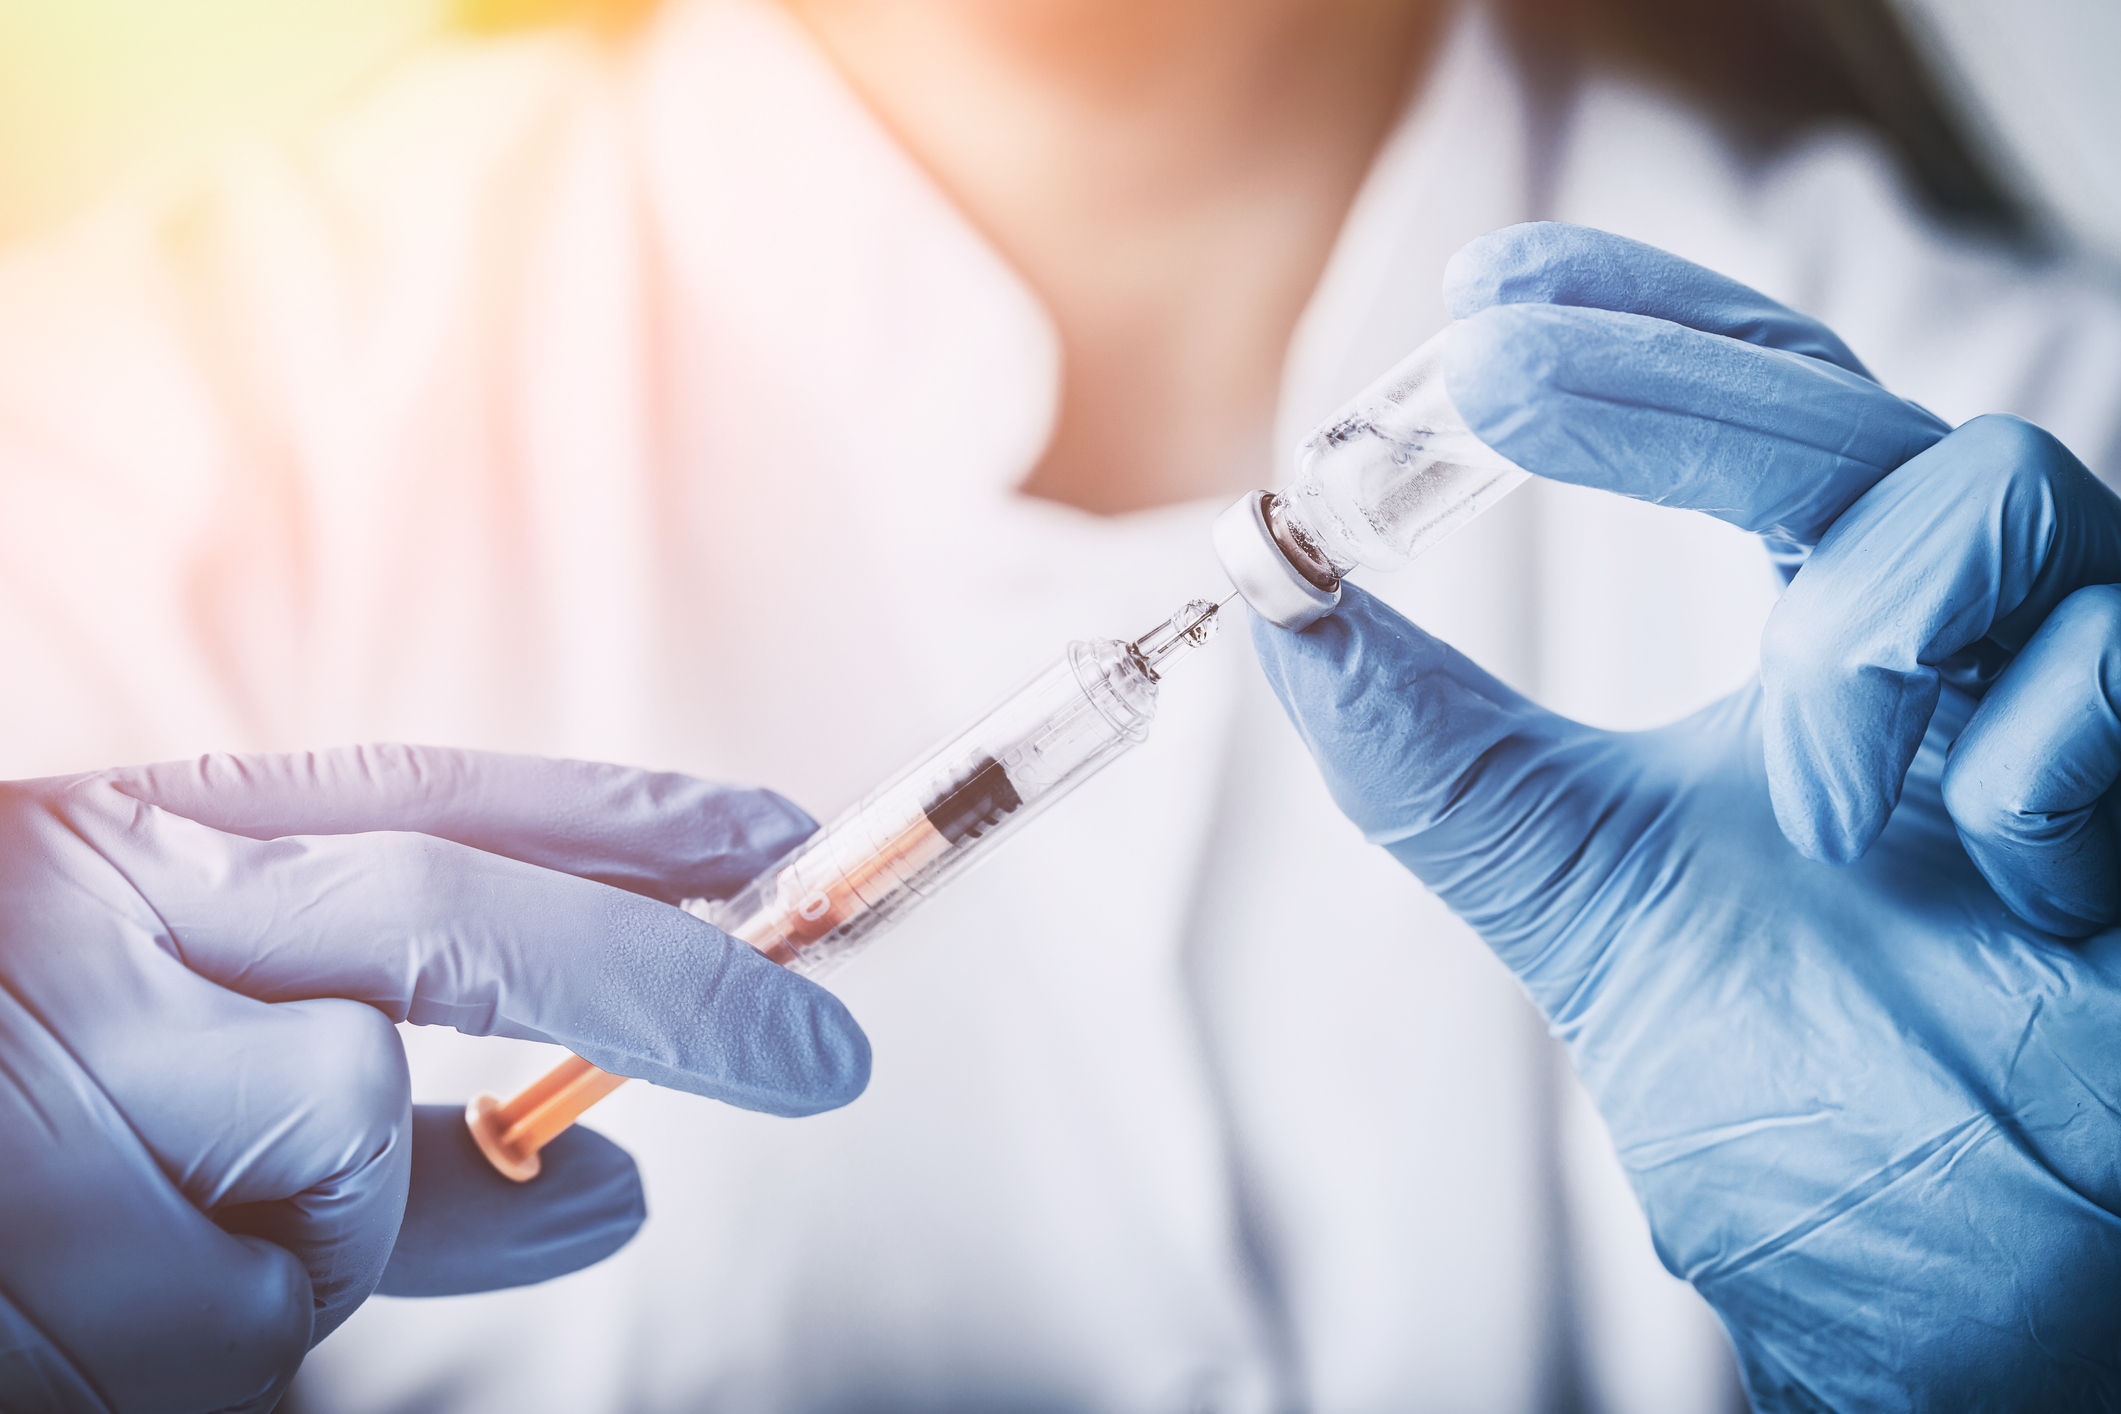 Understanding the importance of vaccinations